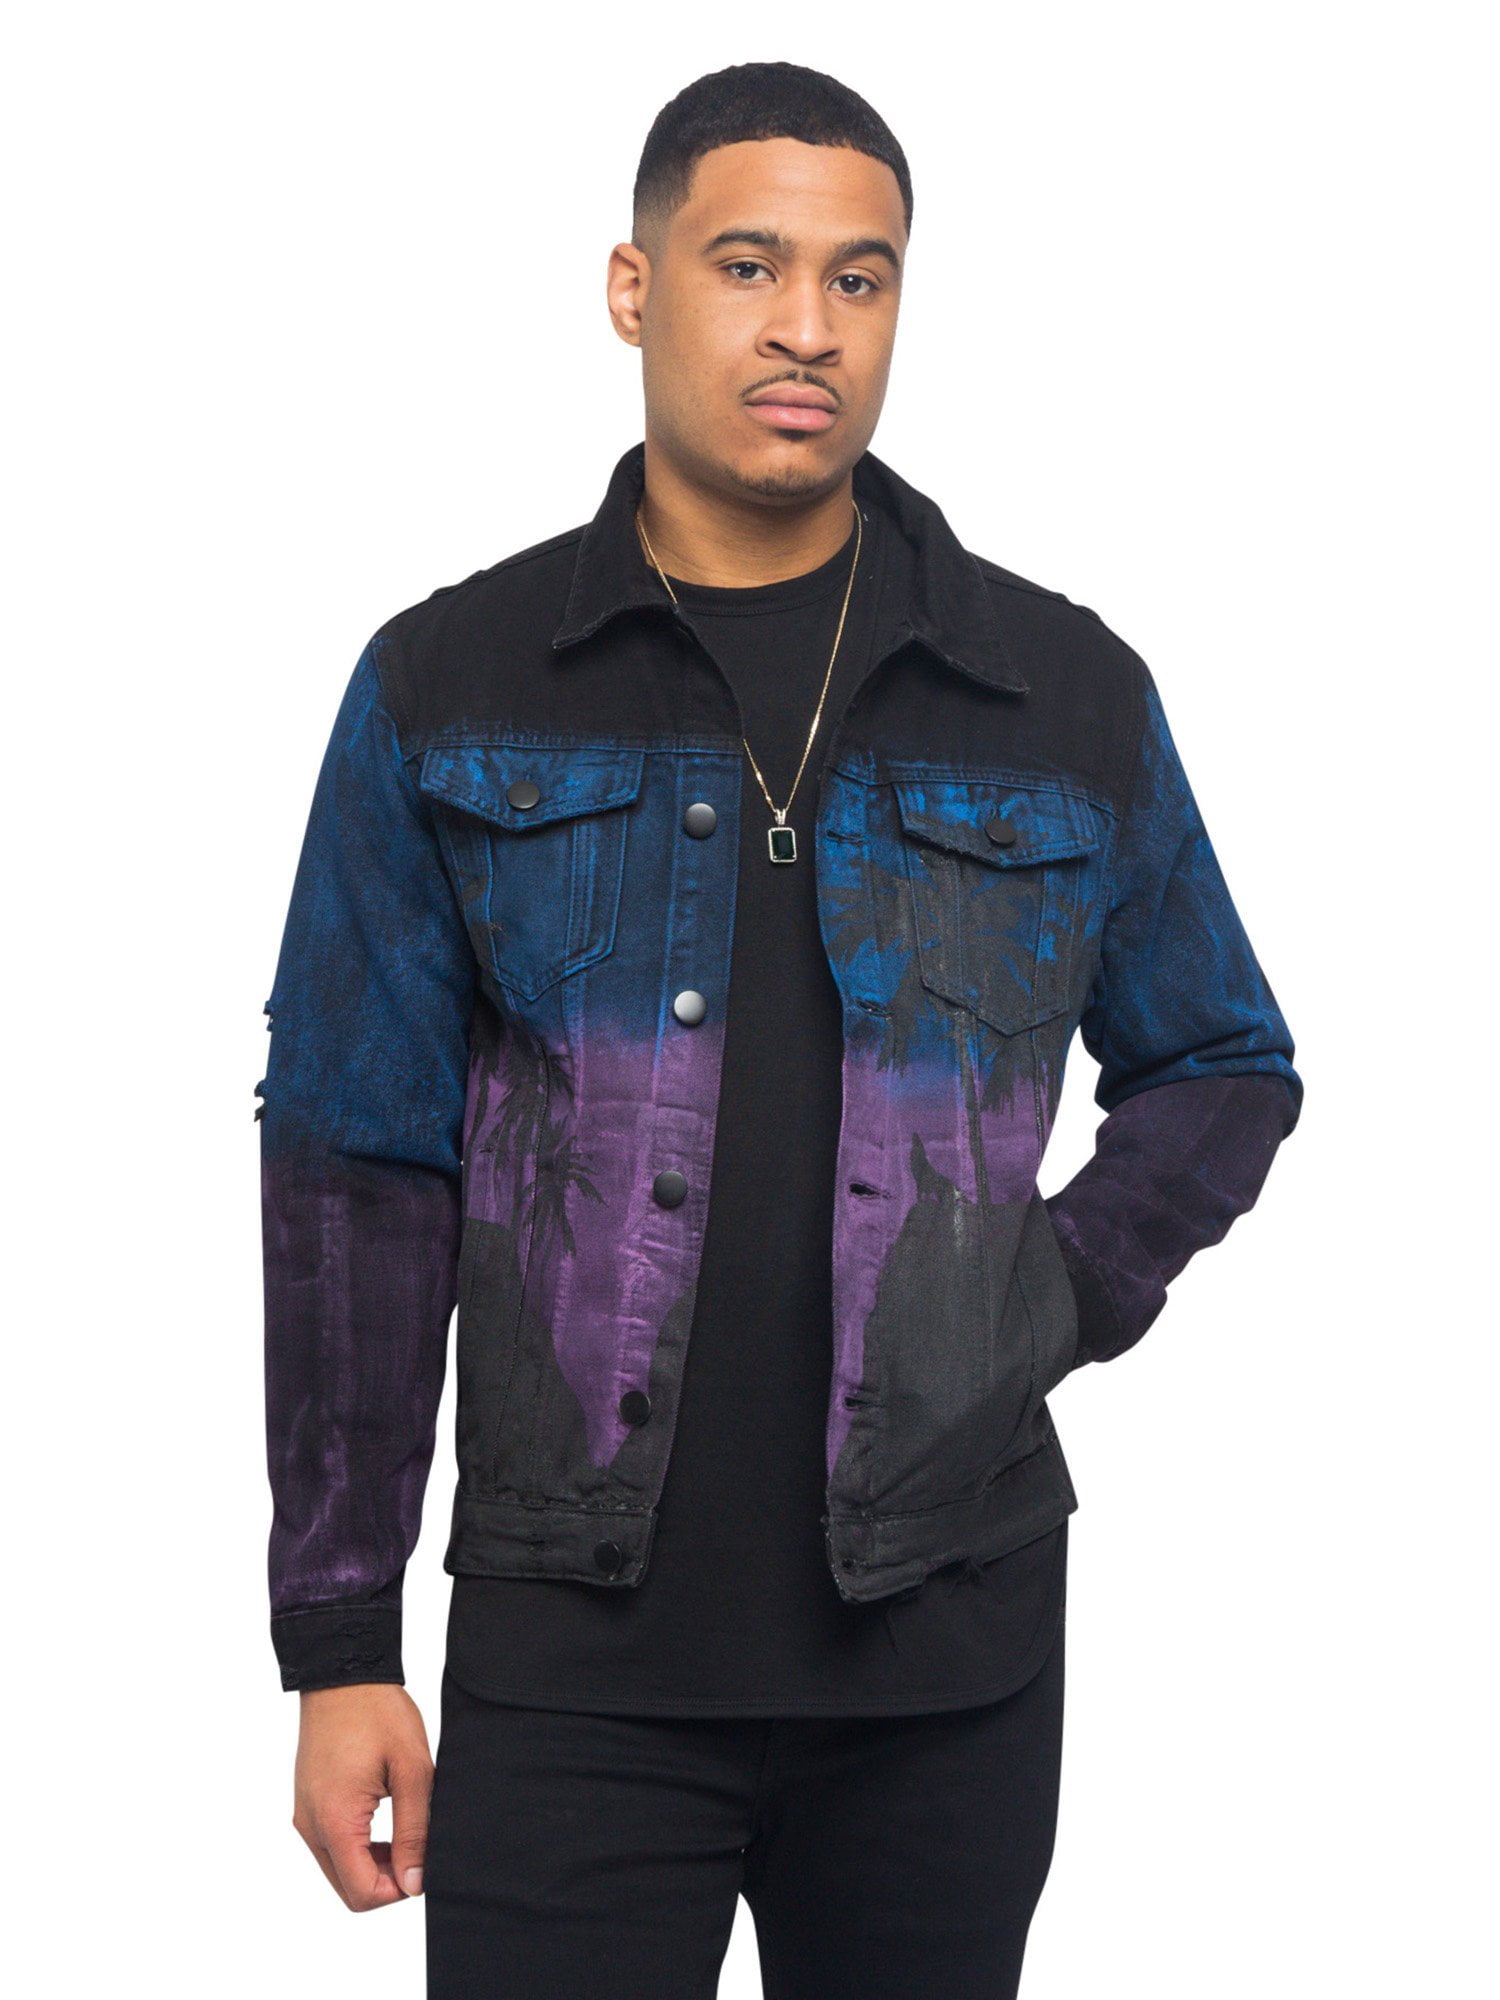 Victorious Men's Casual Distressed Airbrush City Denim Jean Jacket ...